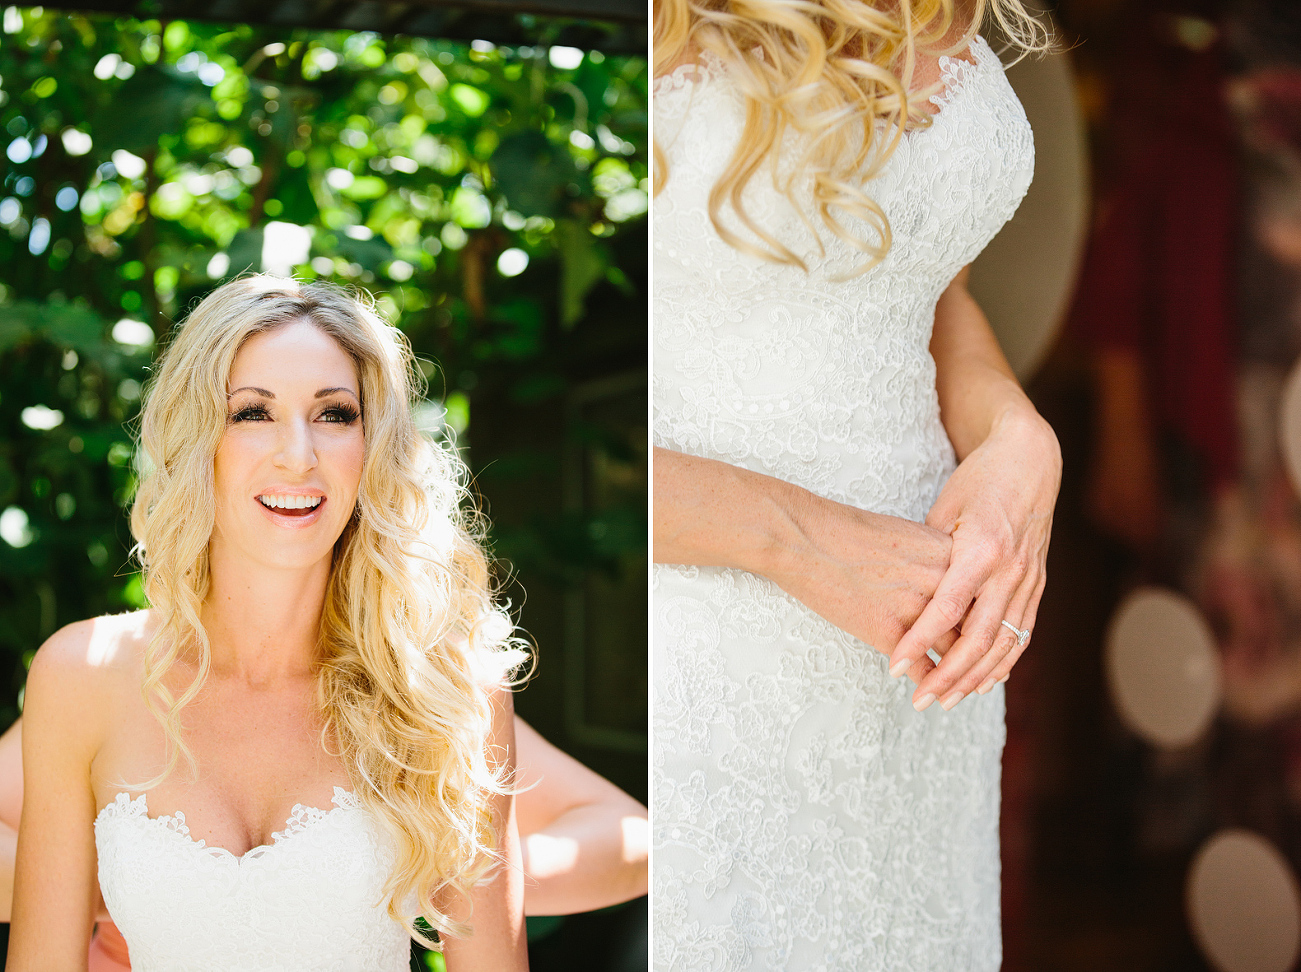 Sidney wore a strapless sweetheart lace wedding dress for her first look and reception. 